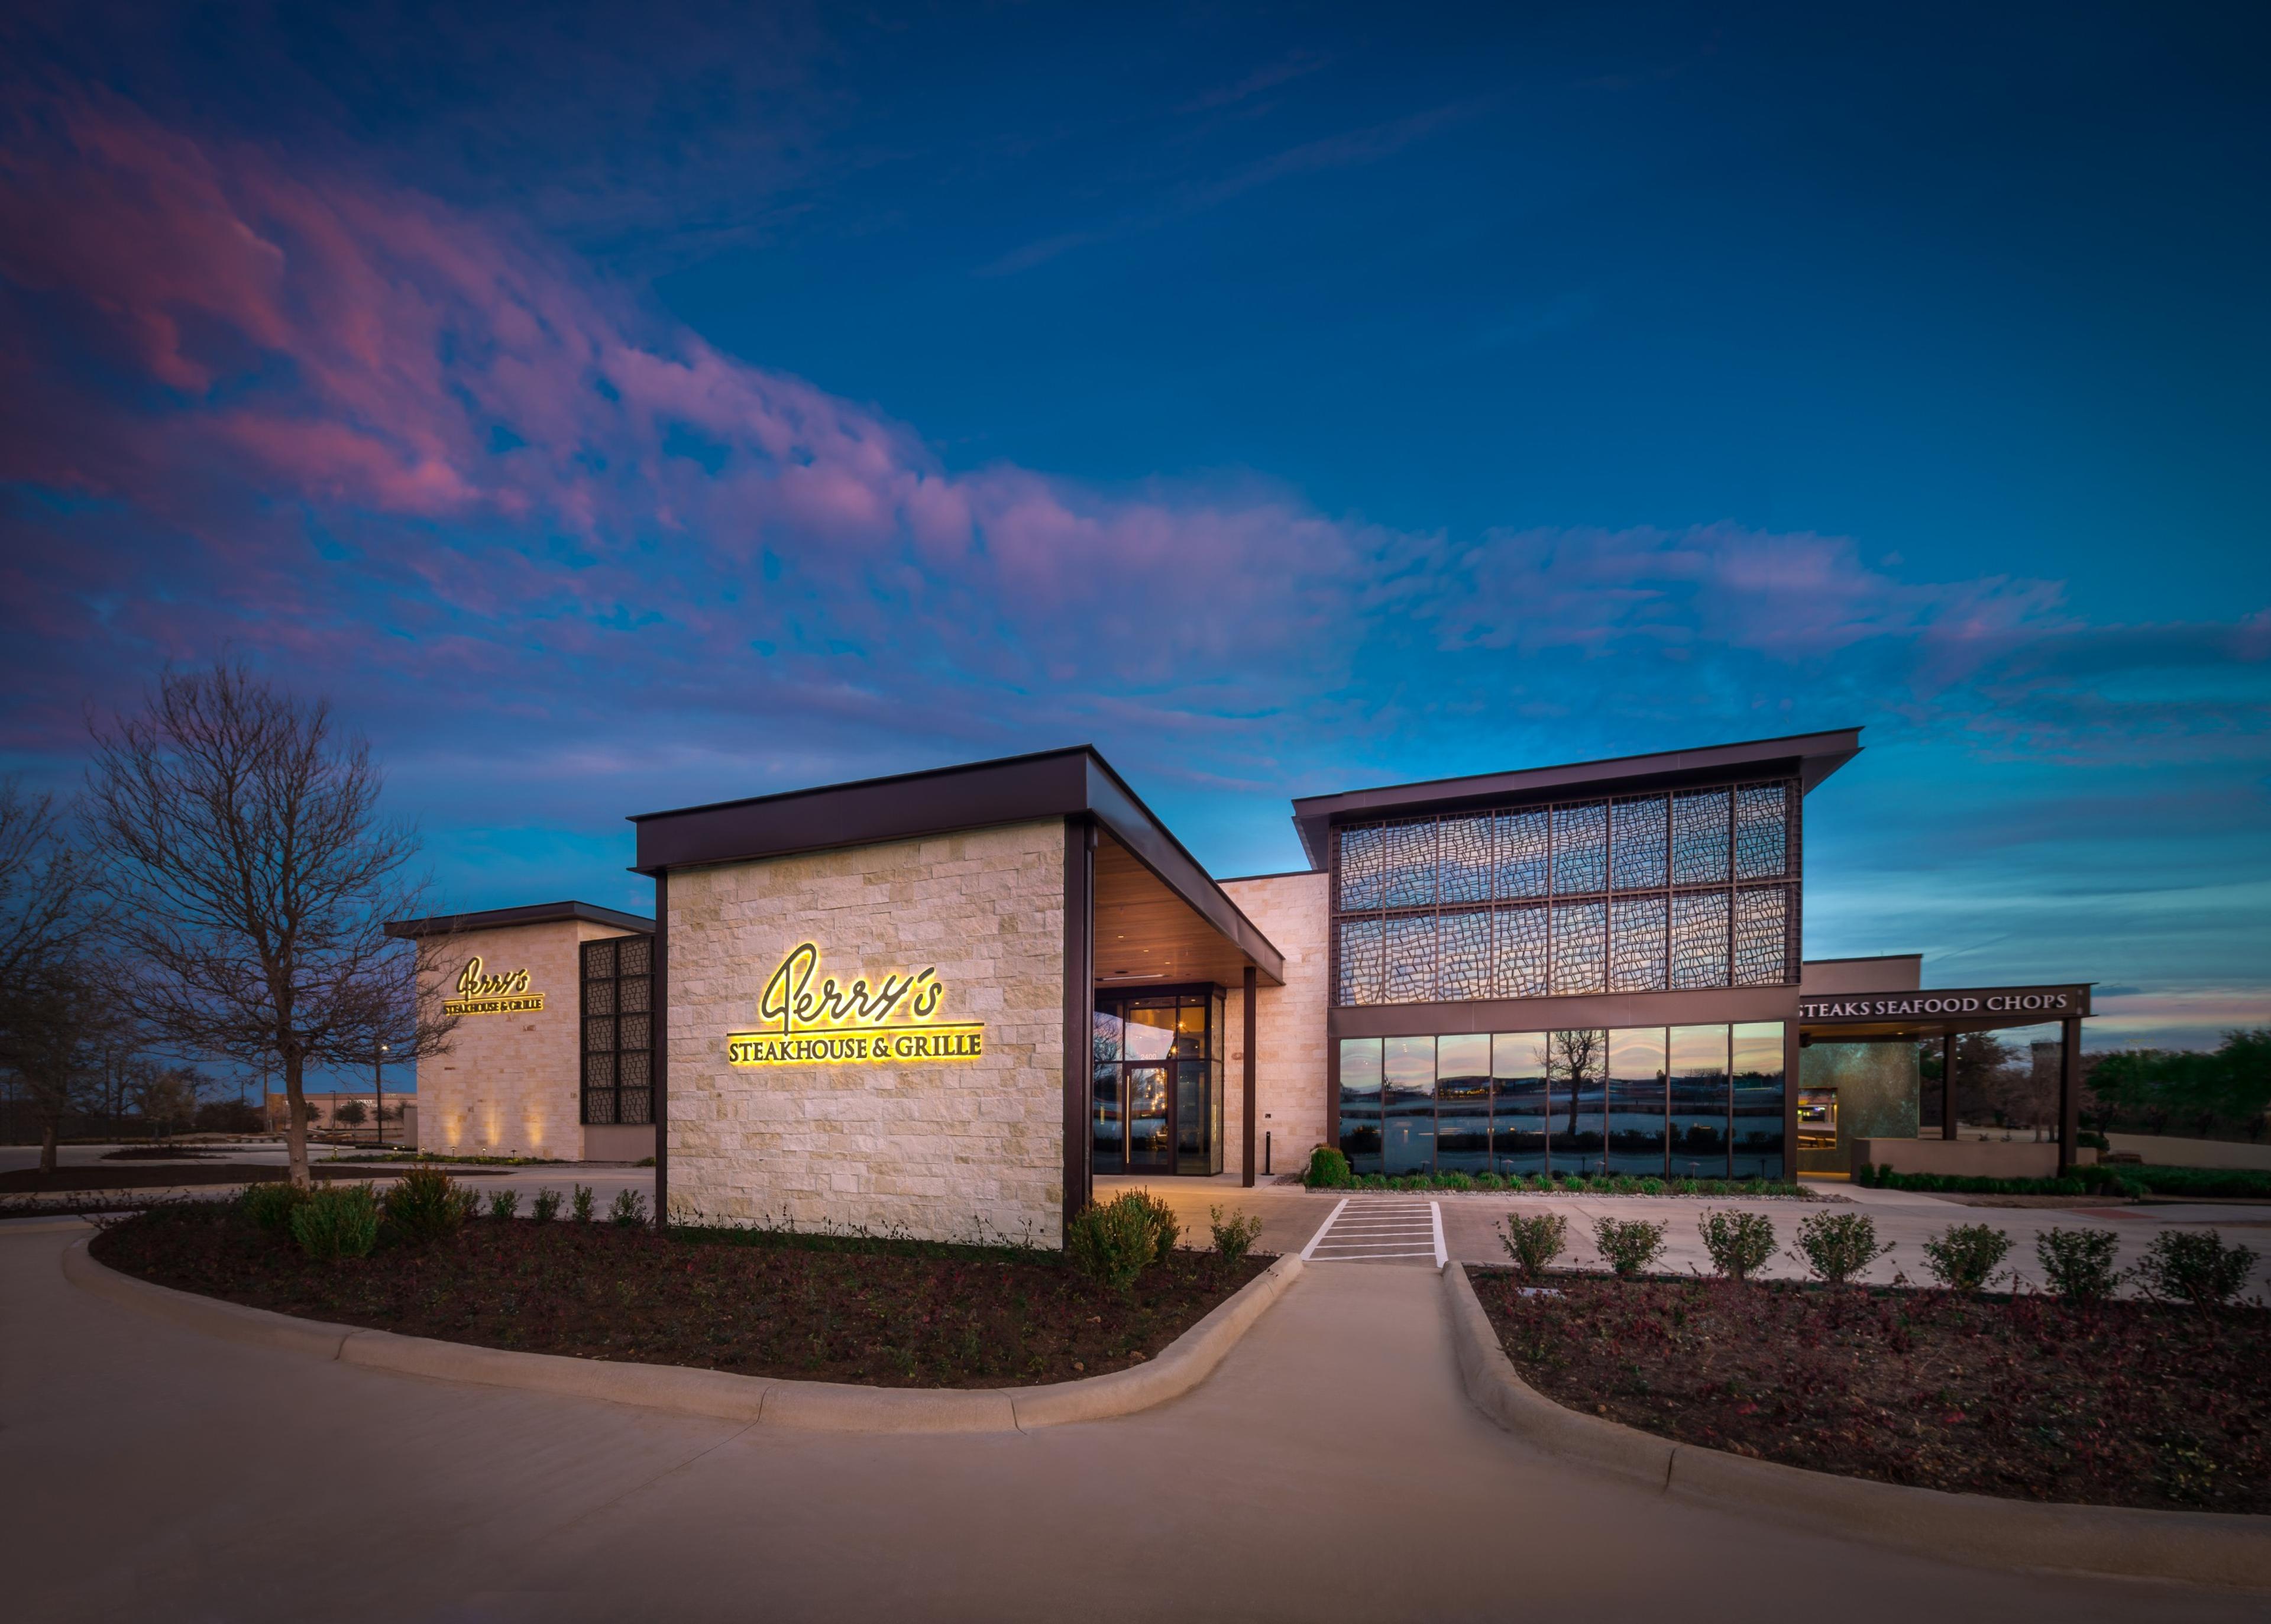 Perry's Steakhouse & Grille - Grapevine